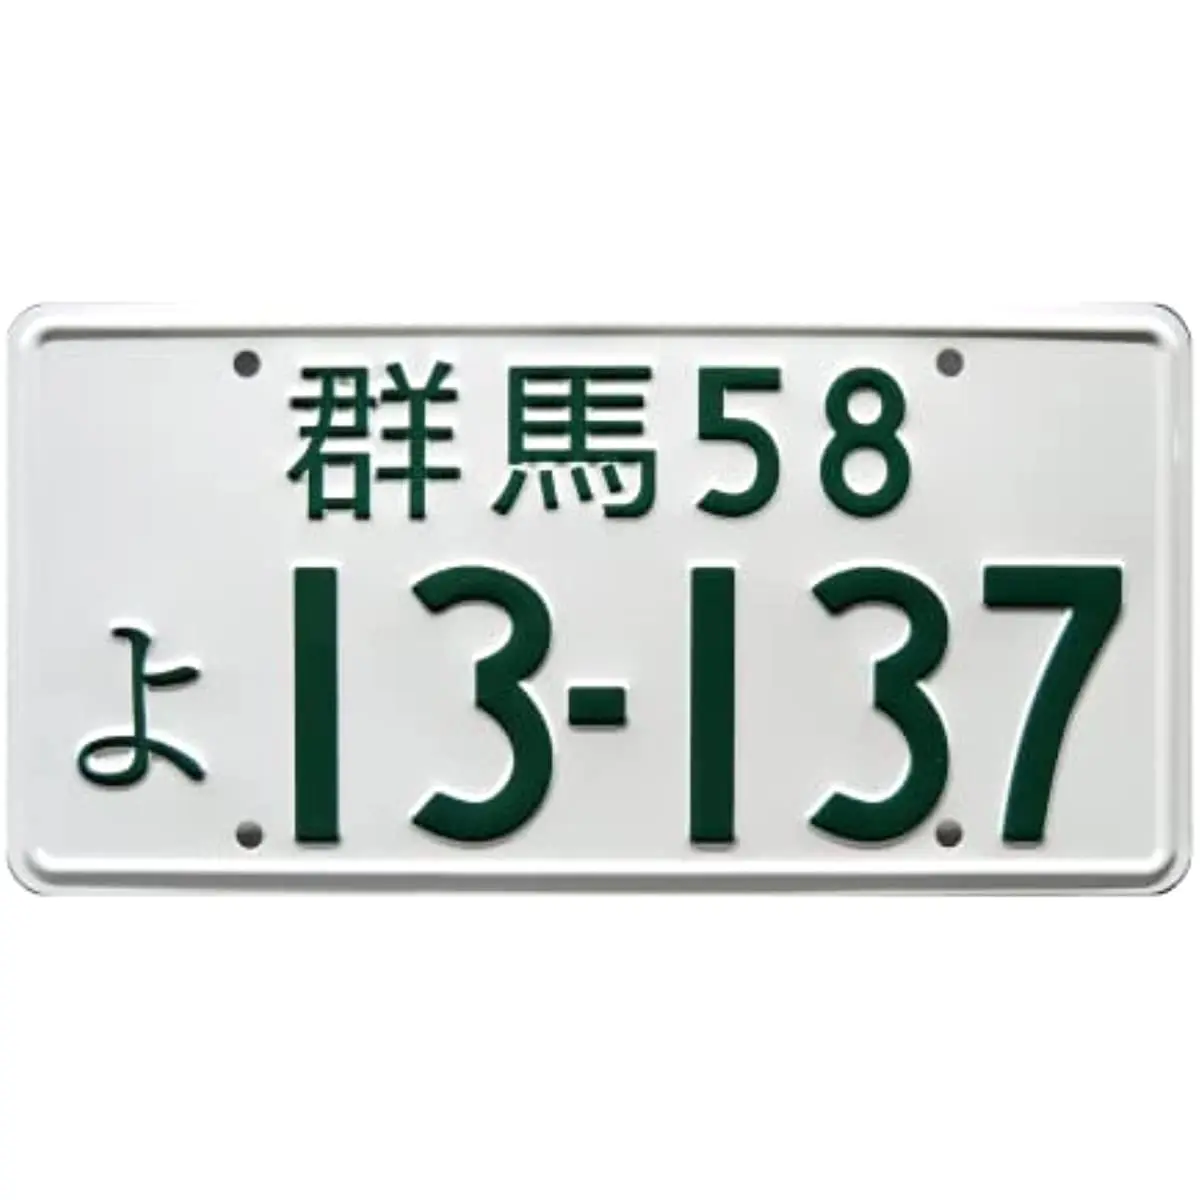 

Initial D | 13-137 | Metal Stamped License Plate wall decor vintage decor farmhouse decor posters